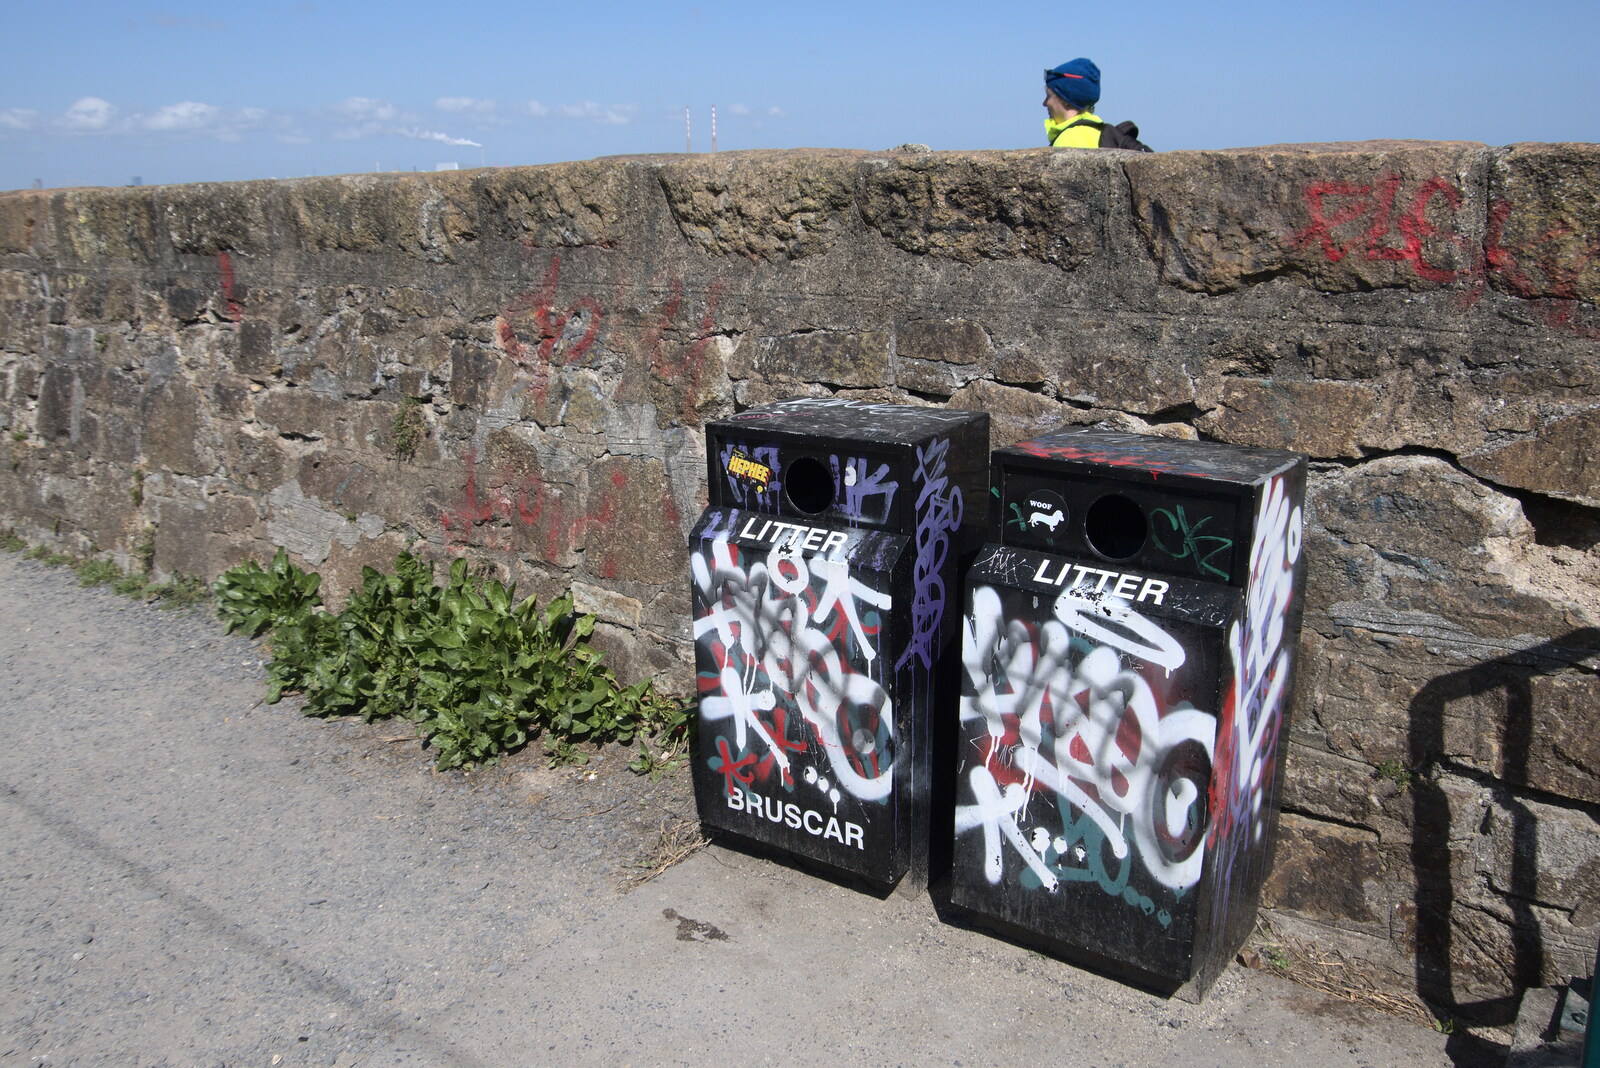 Blackrock North and South, Louth and County Dublin, Ireland - 23rd April 2022: Heavily tagged litter bins